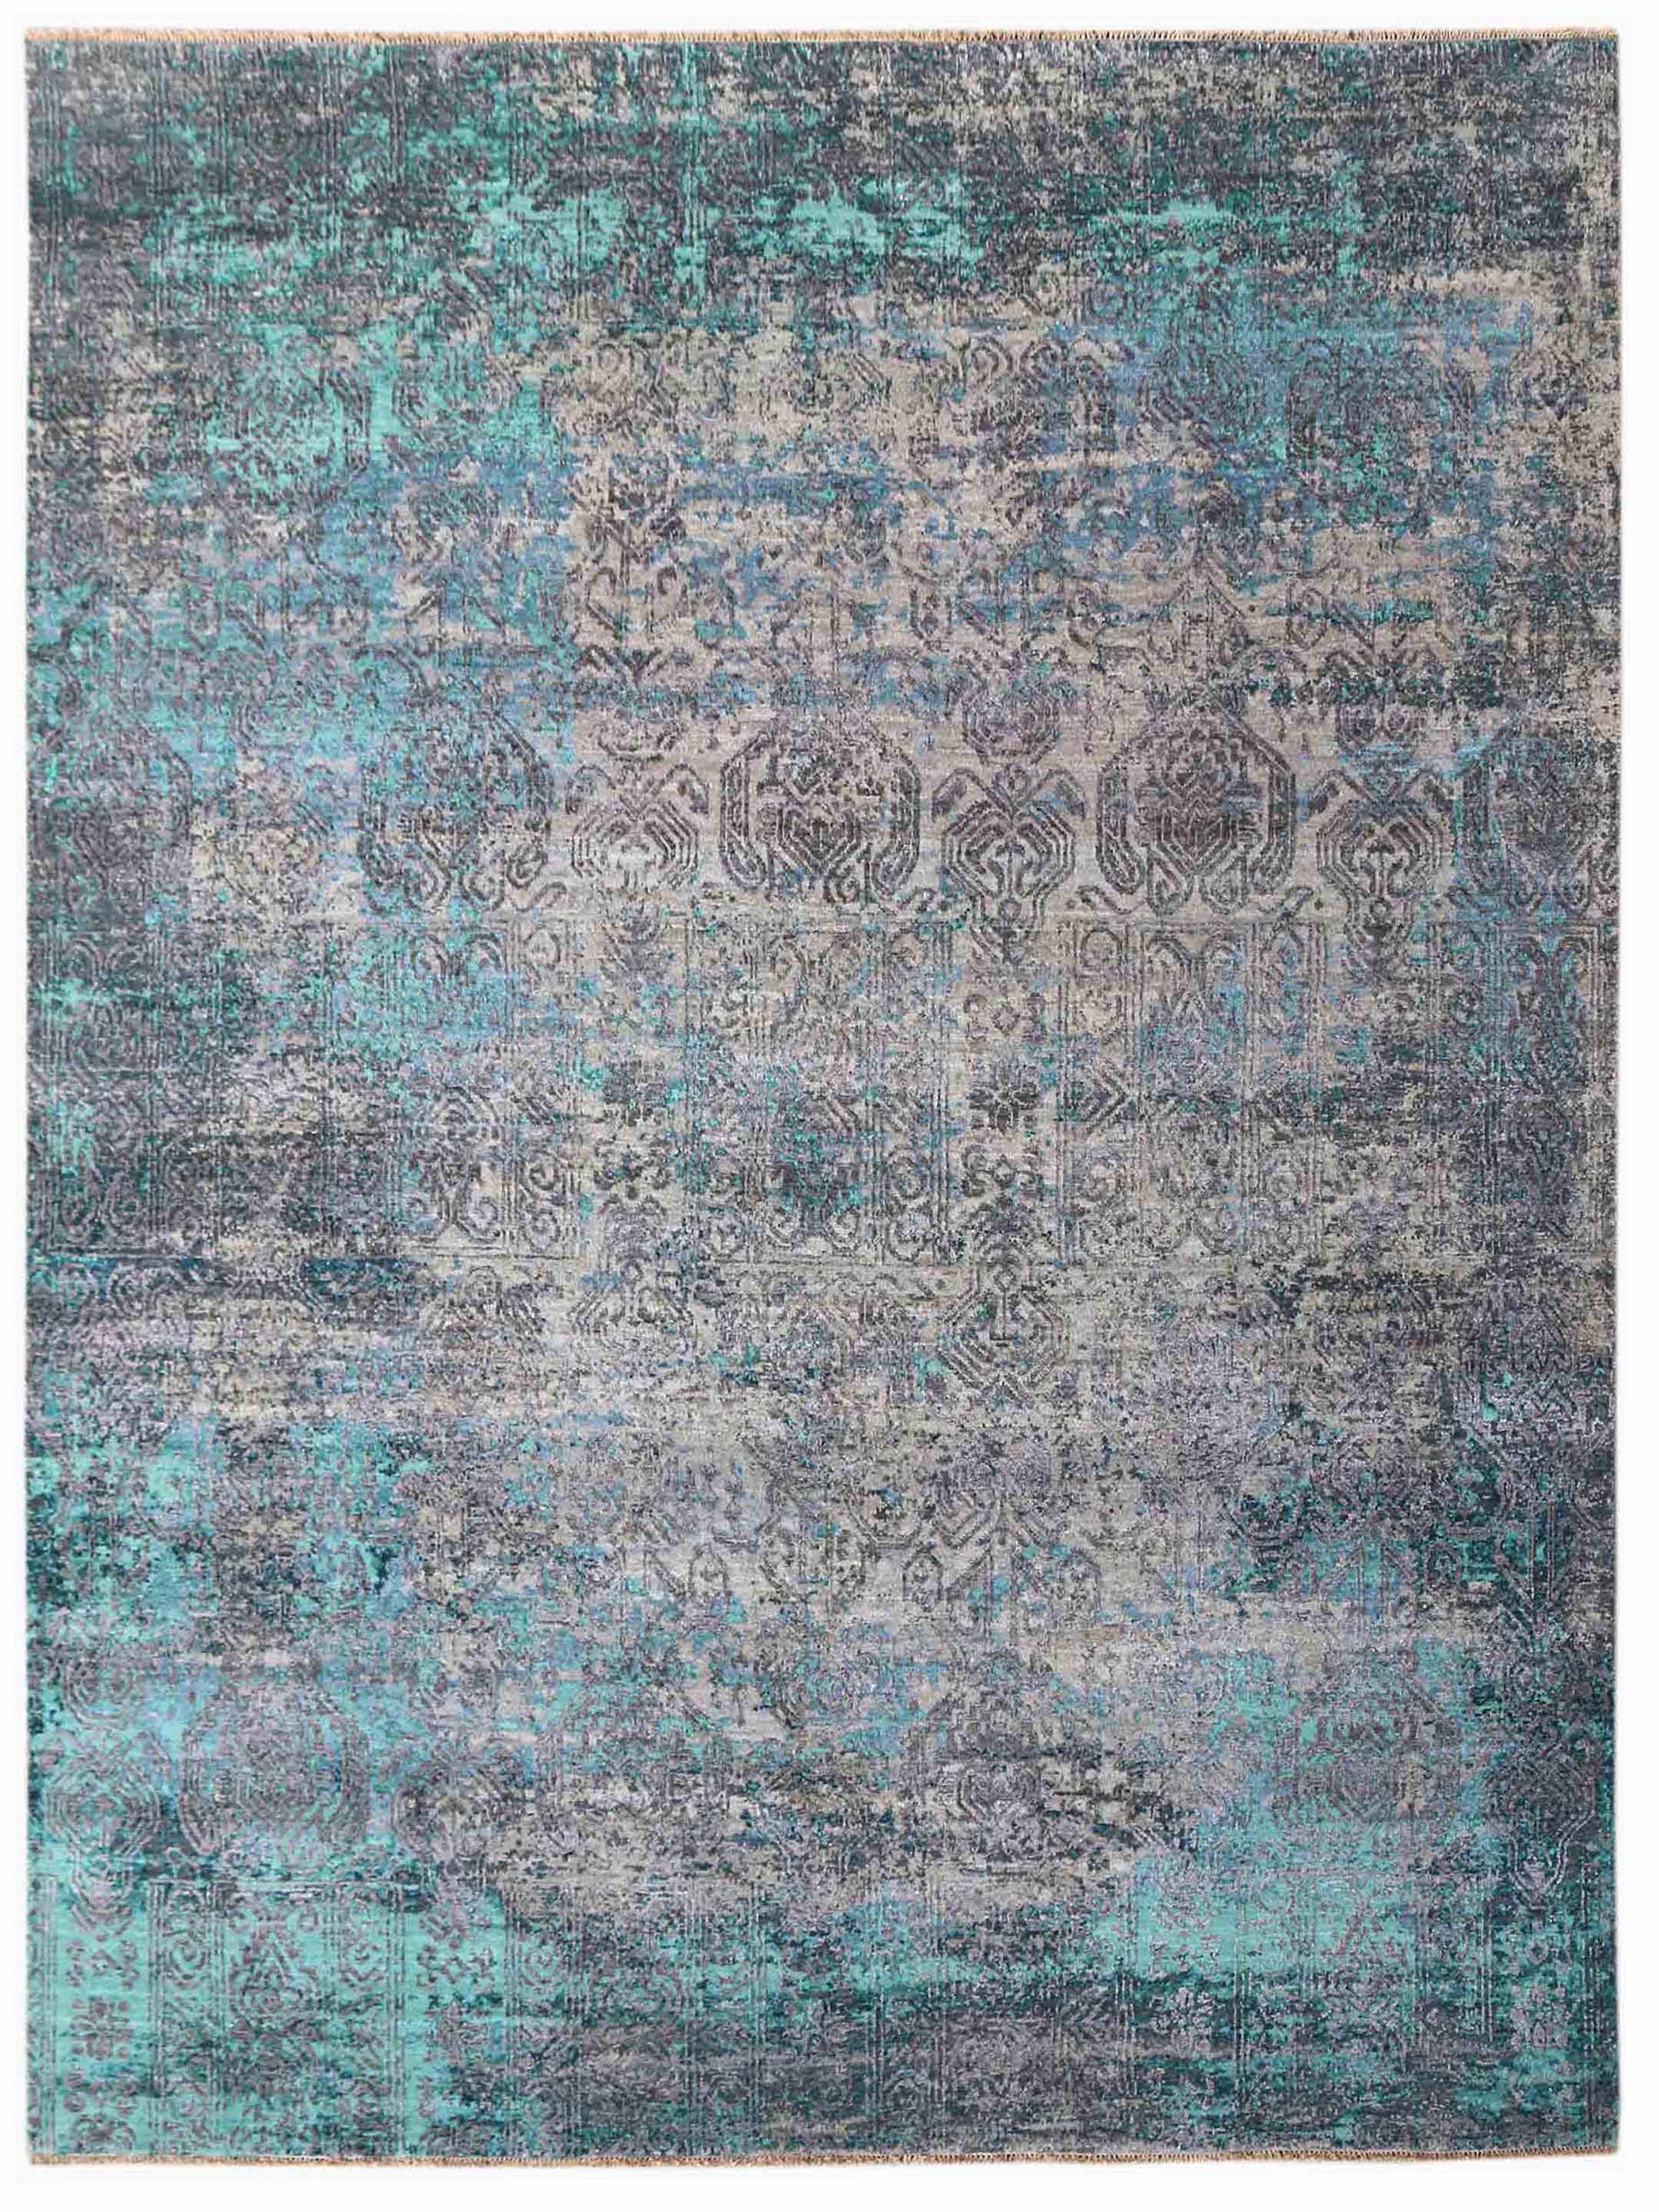 Limited Rylstone RST-704 Turquoise Transitional Knotted Rug